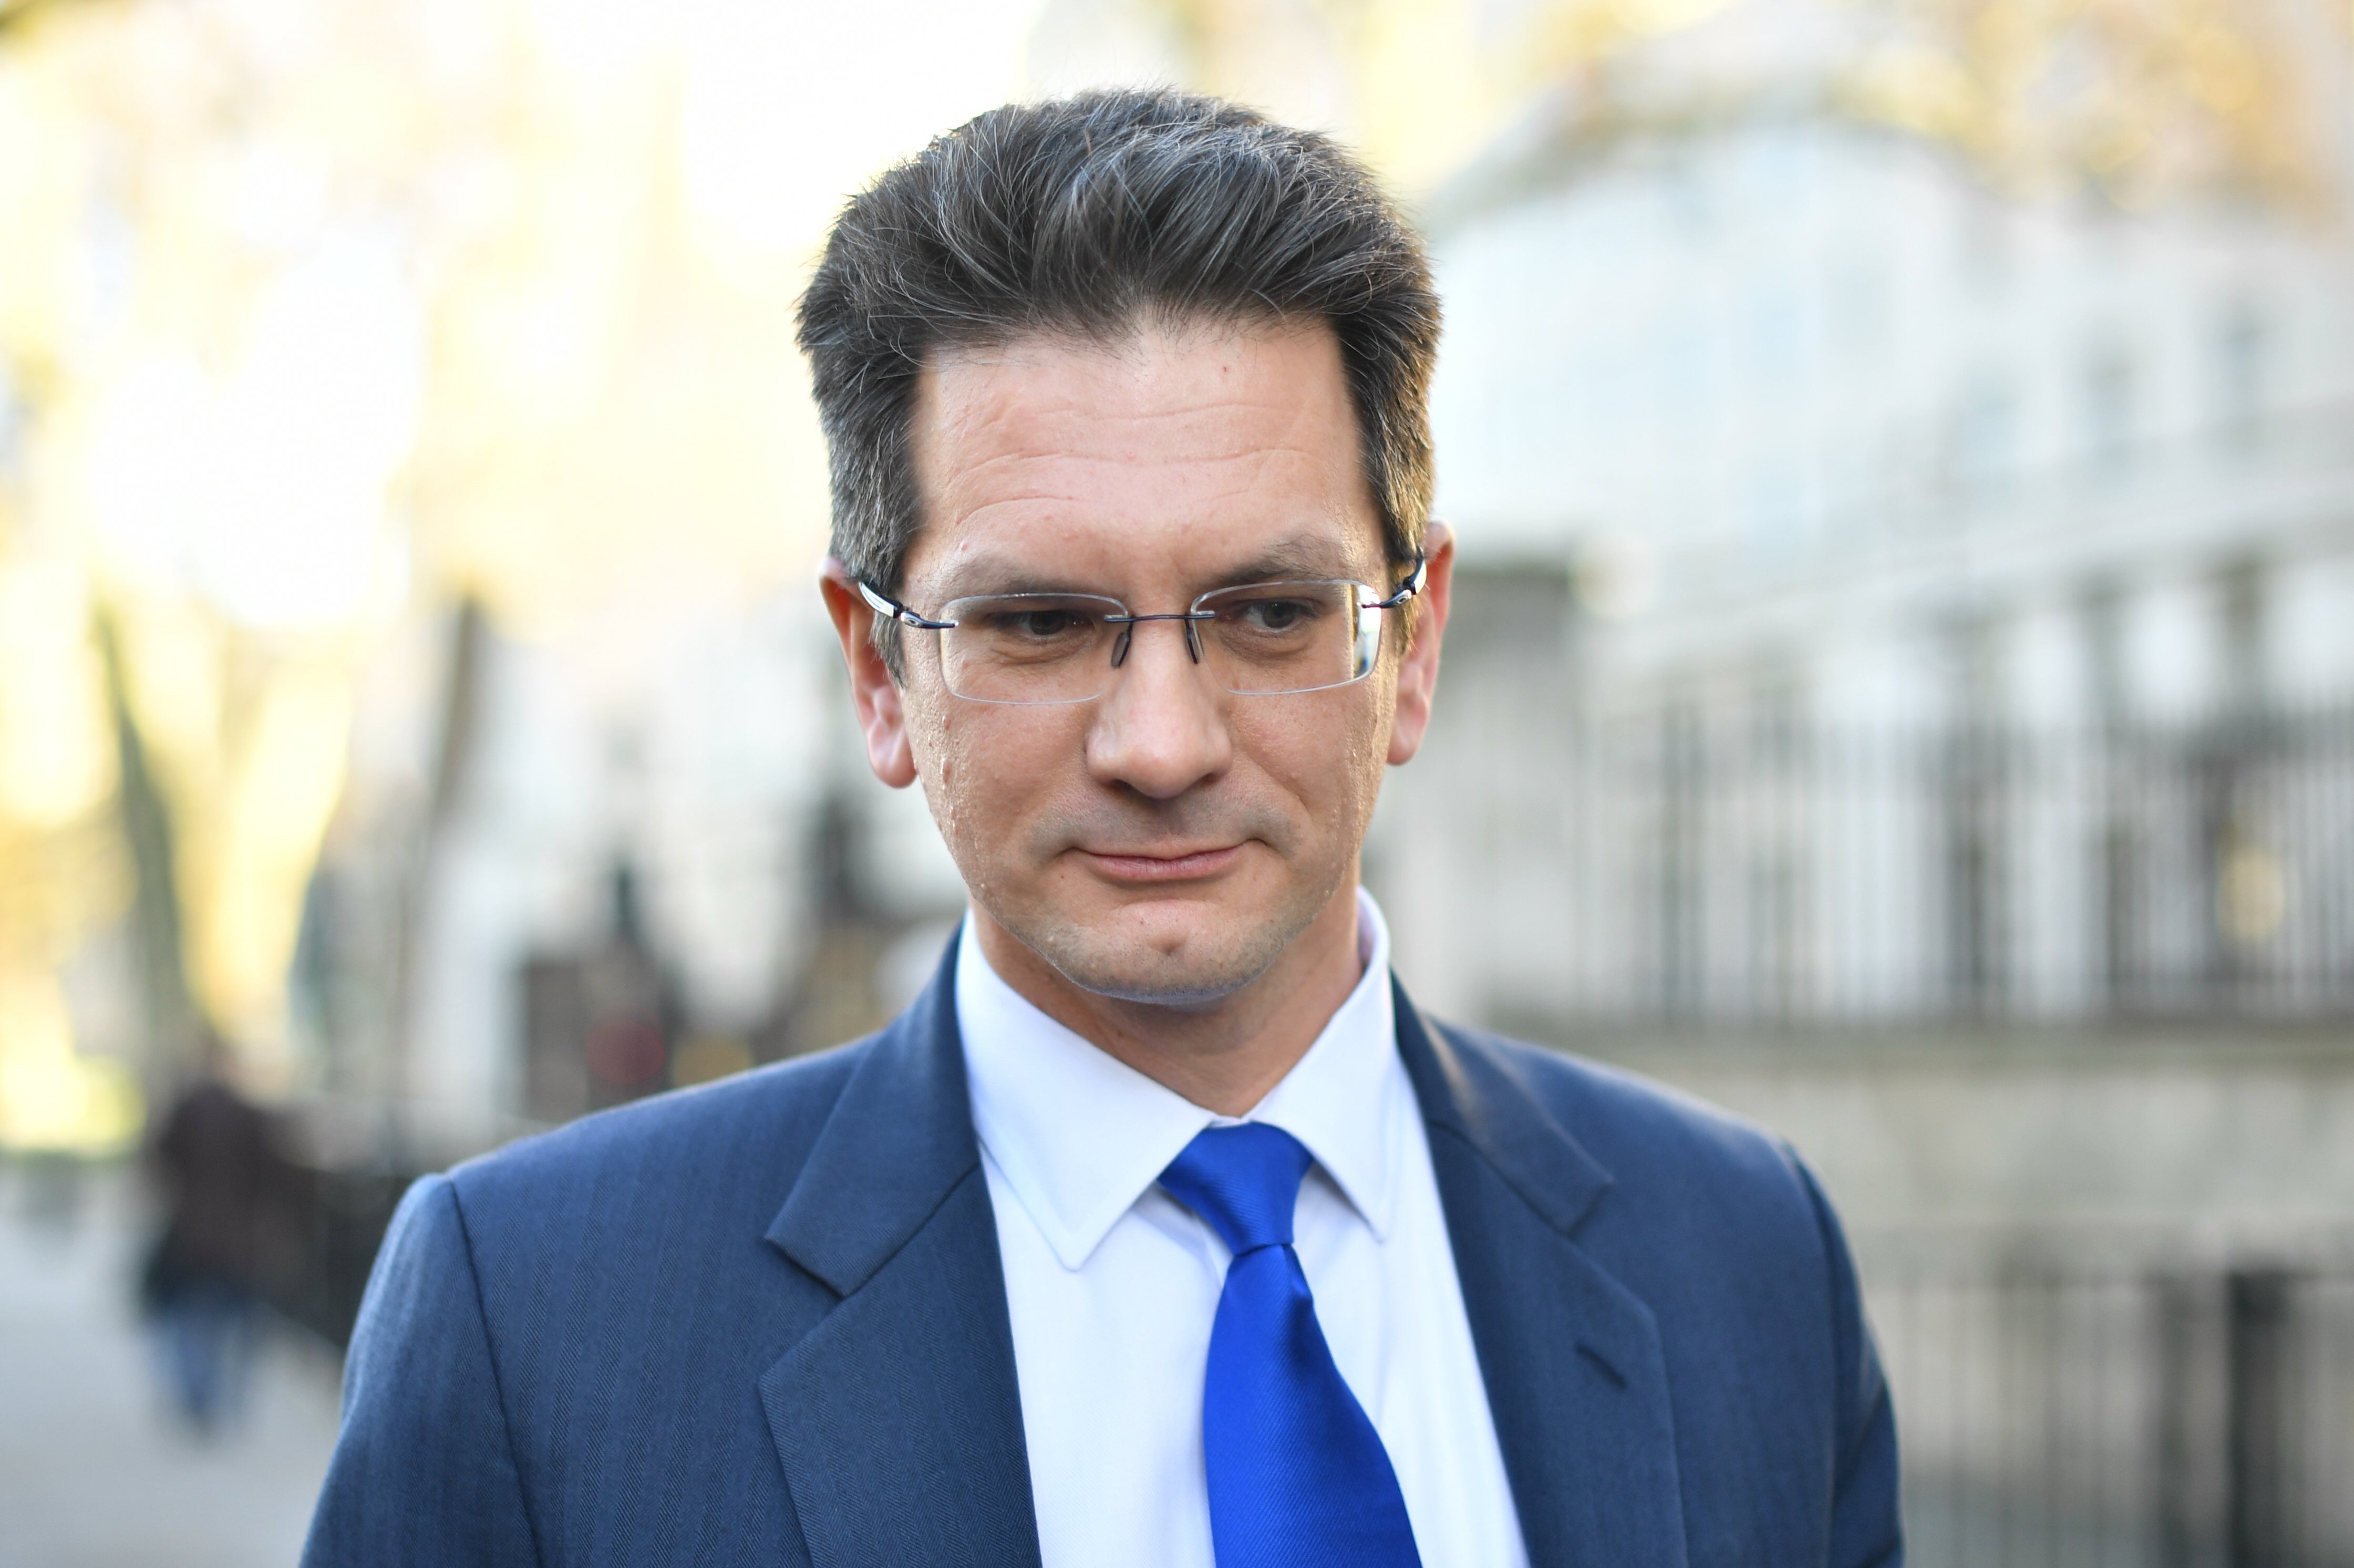 MP Steve Baker, founder of the Net Zero Scrutiny Group, says he believes there is ‘no short-term threat’ from the climate crisis